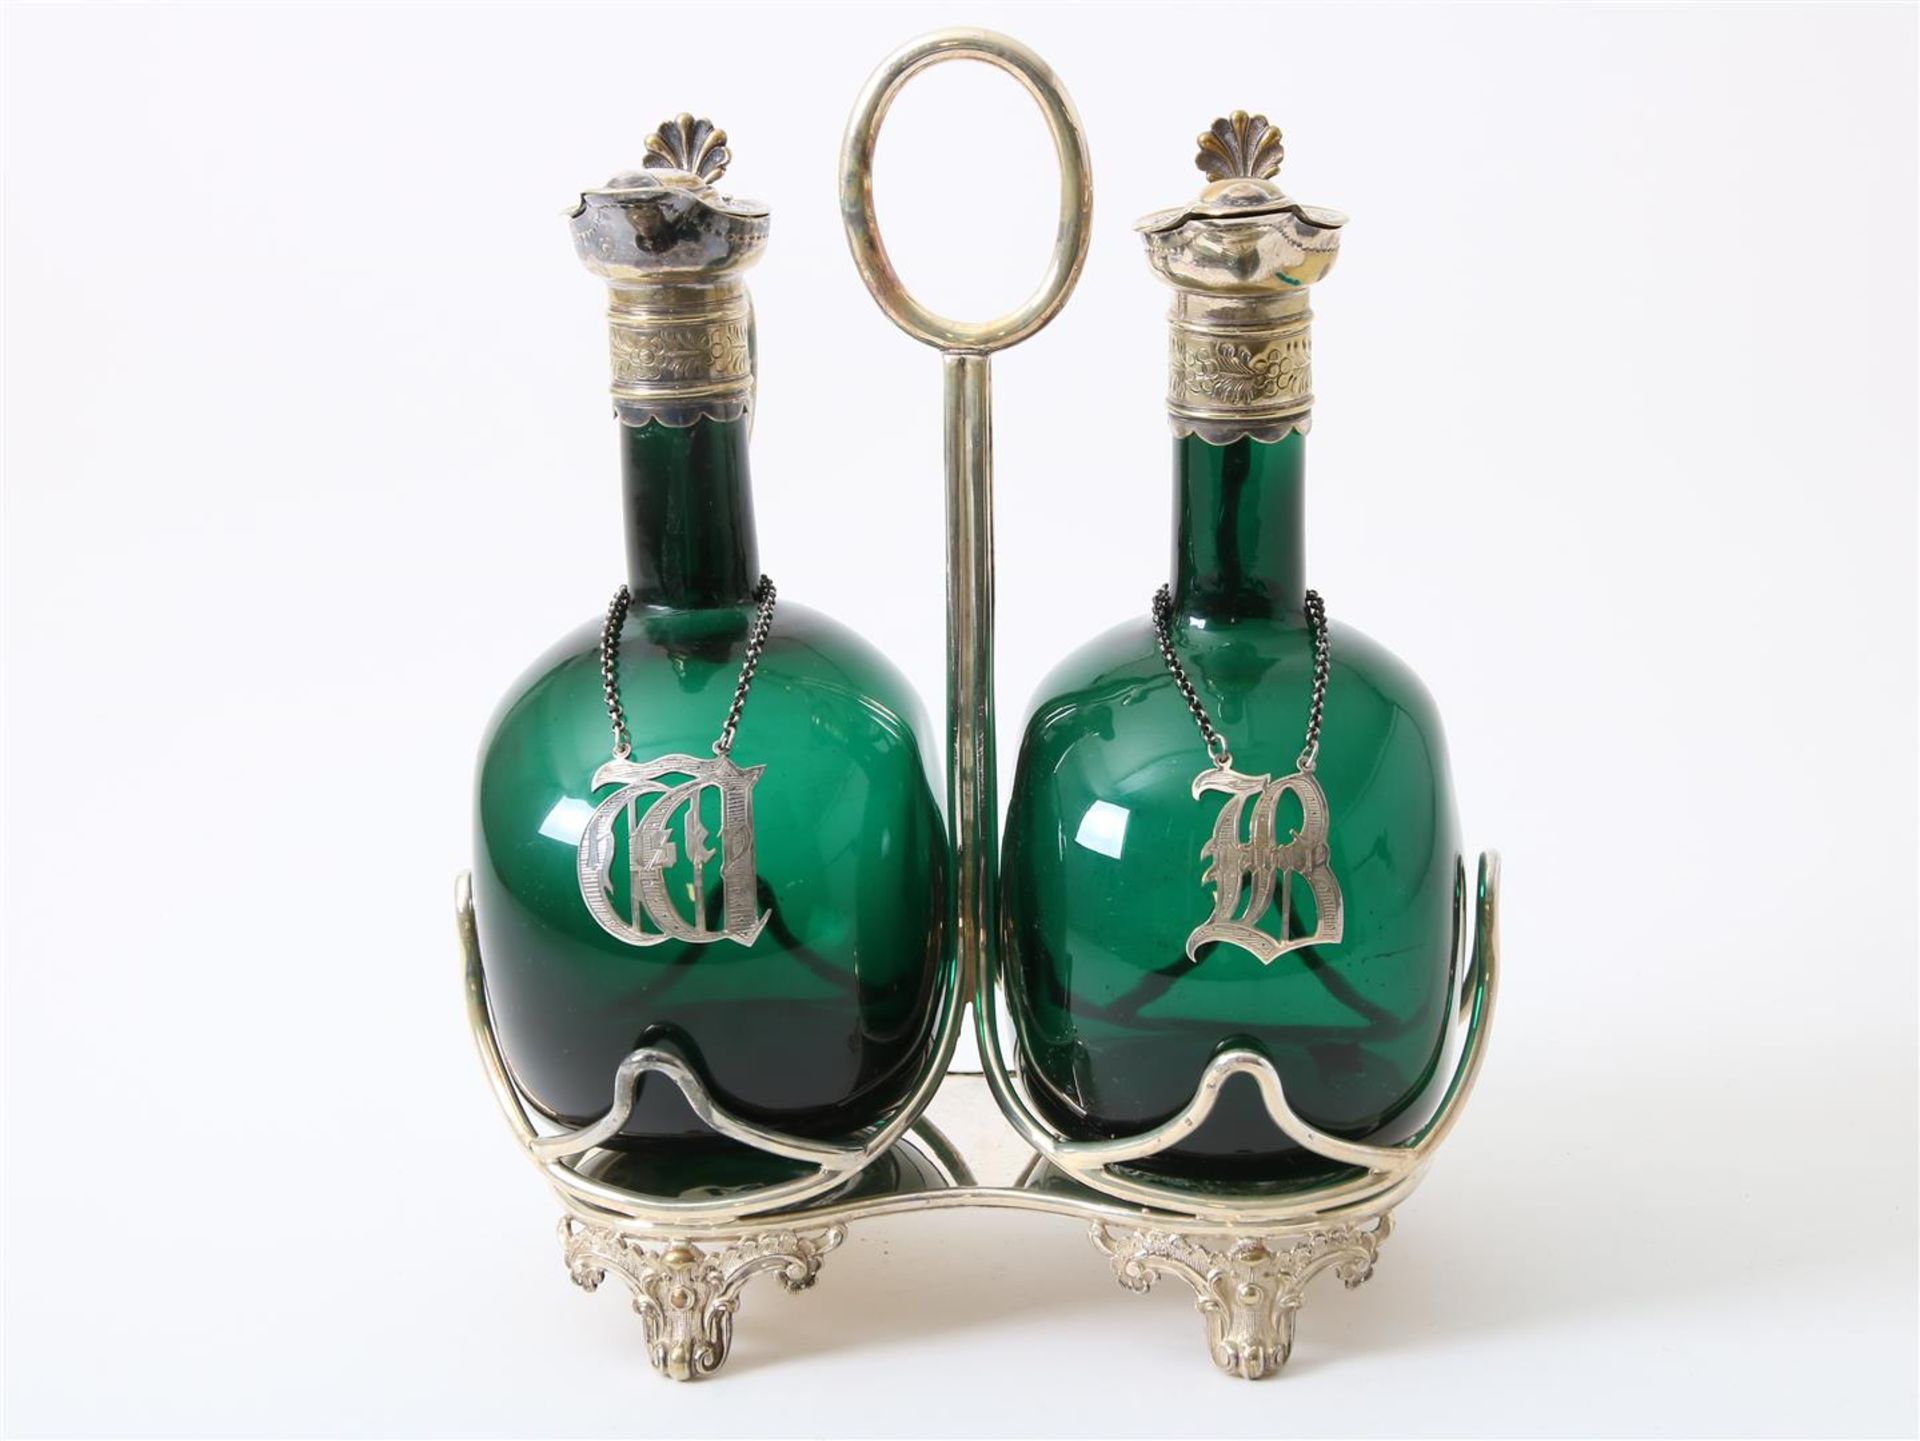 Decanter set, green glass convex belly decanters with plated lid frames in plated mounting. Bristol